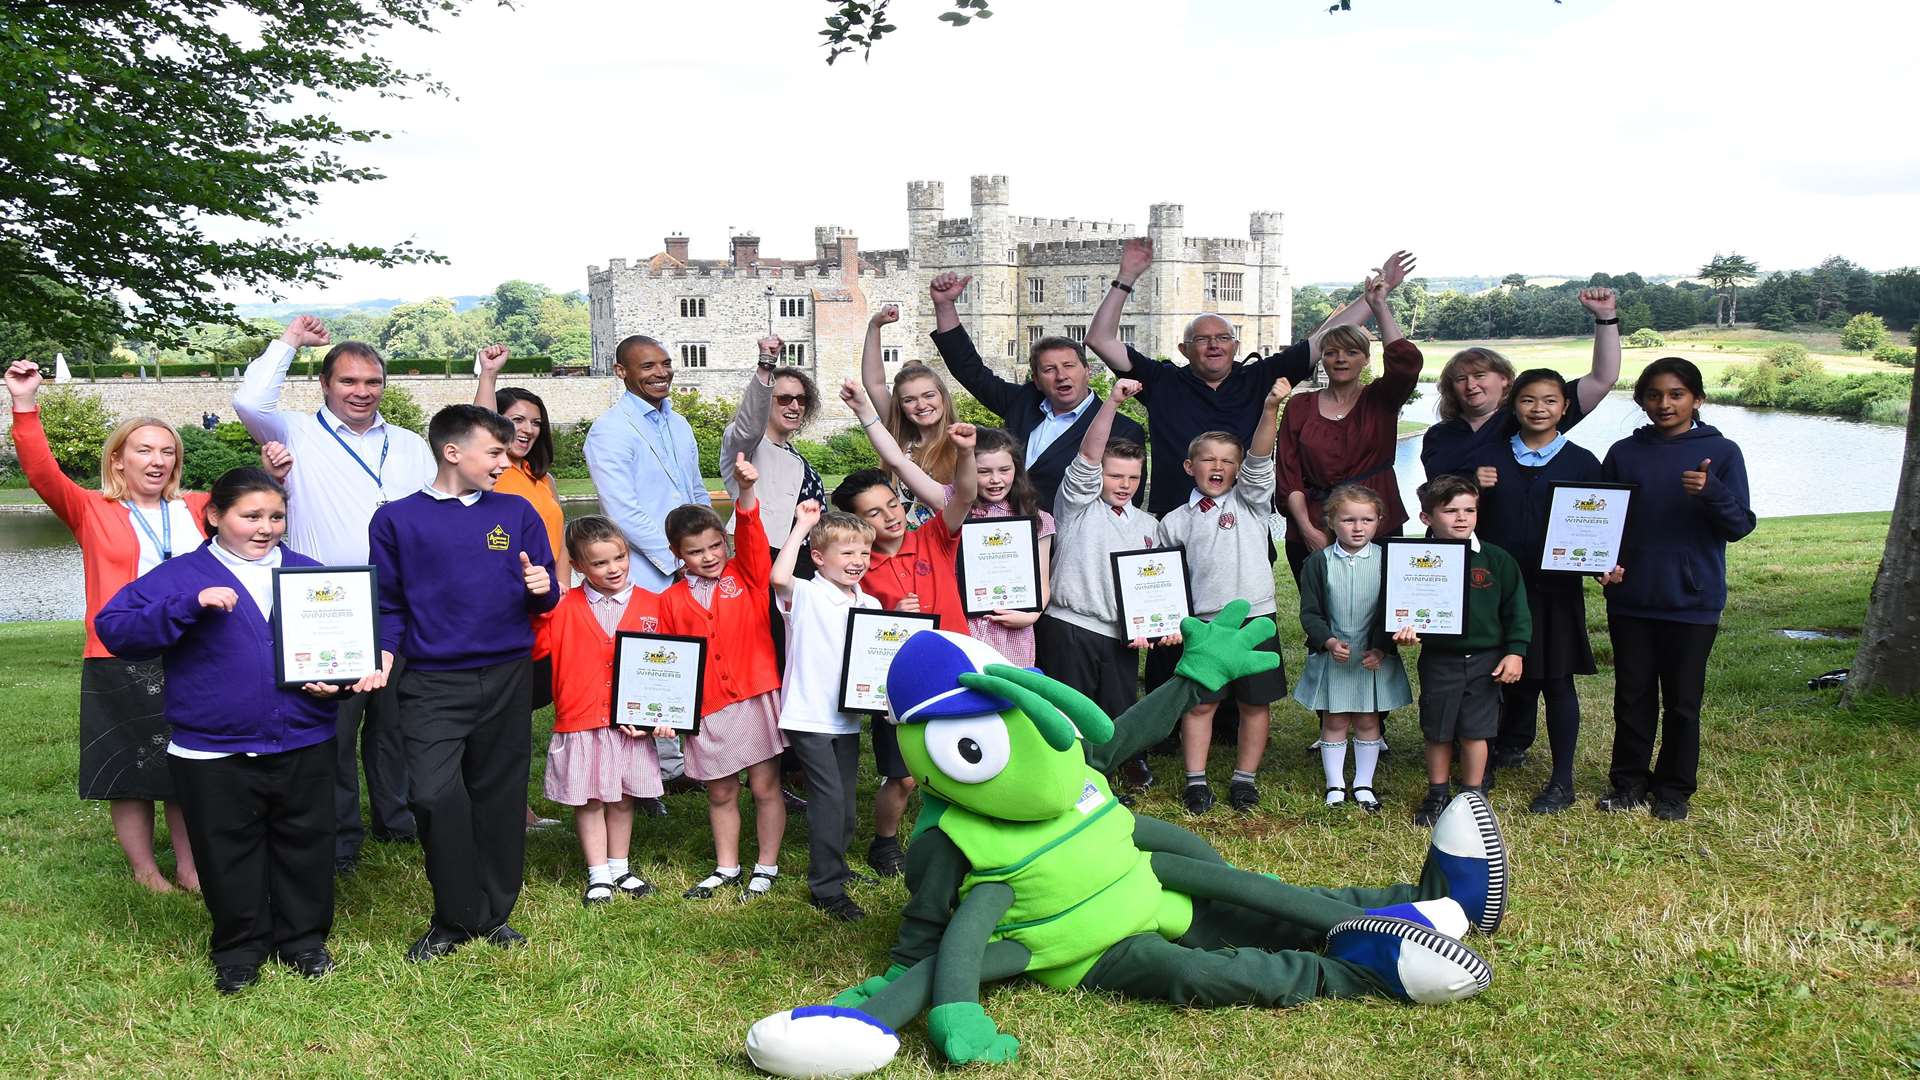 KM Walk to School champions celebrate success with key partners at the Summer Challenge Day event staged at Leeds Castle